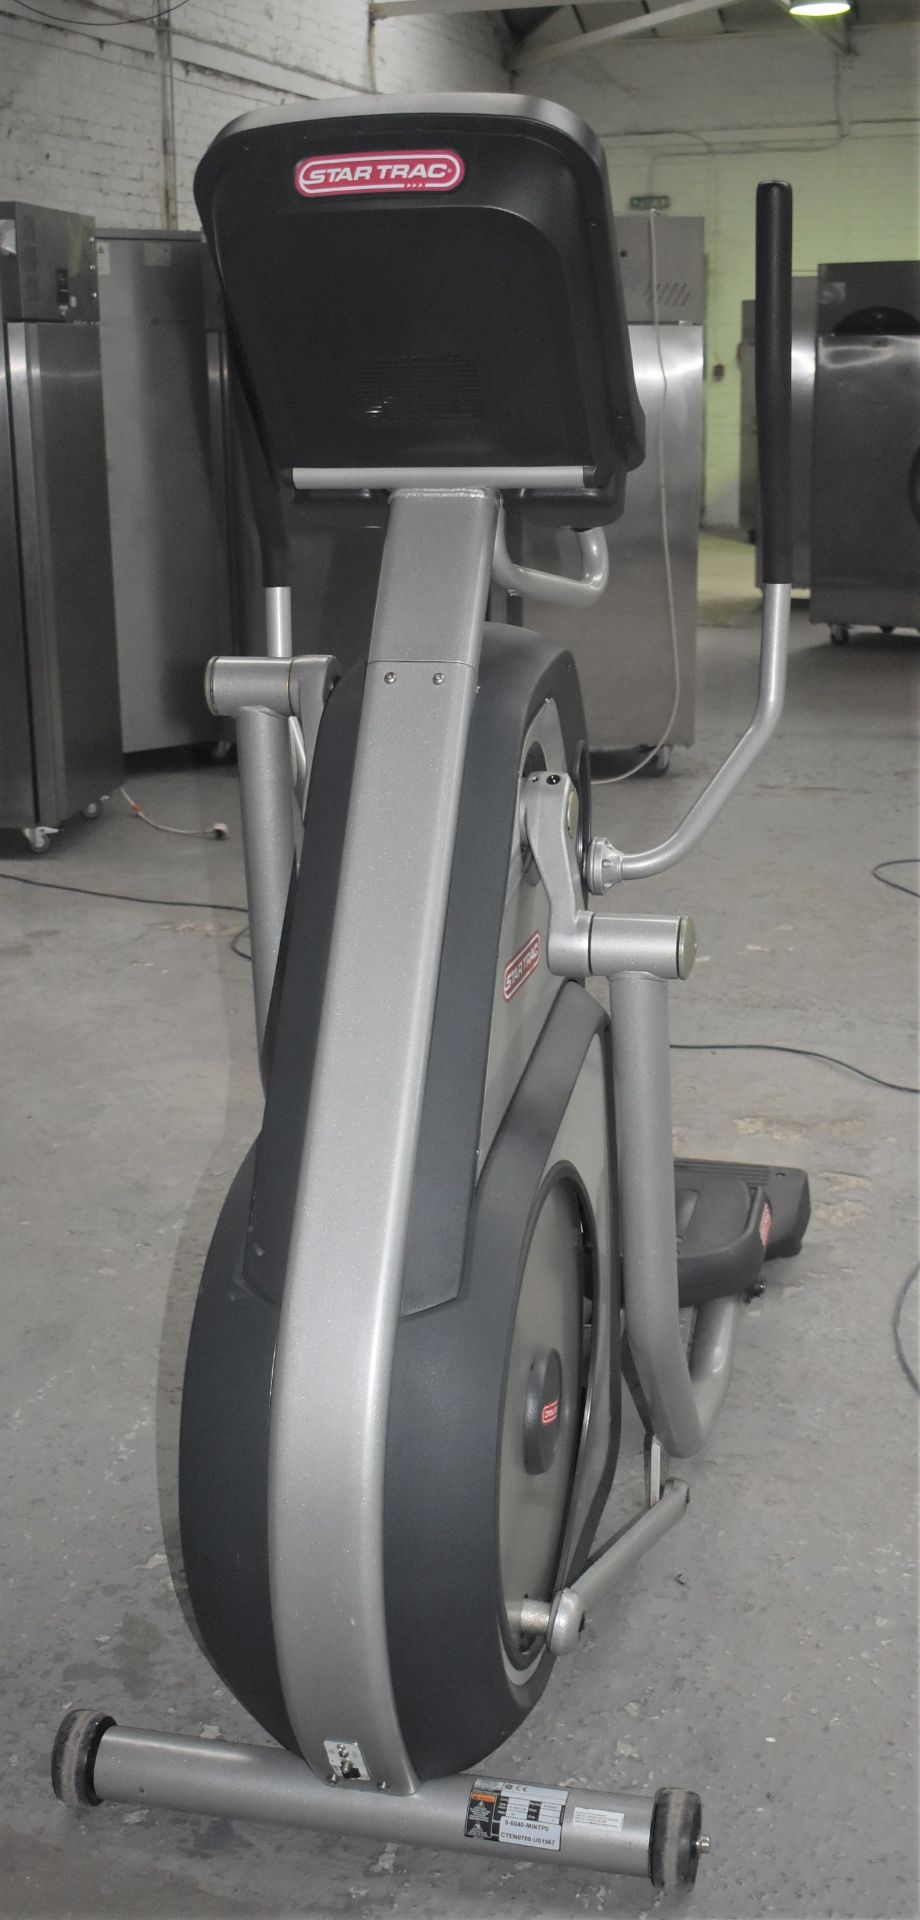 1 x Star Trac Commercial Excercise Elliptical Cross Trainer - CL011 - Ref SL307 GIT -  Location: - Image 2 of 9